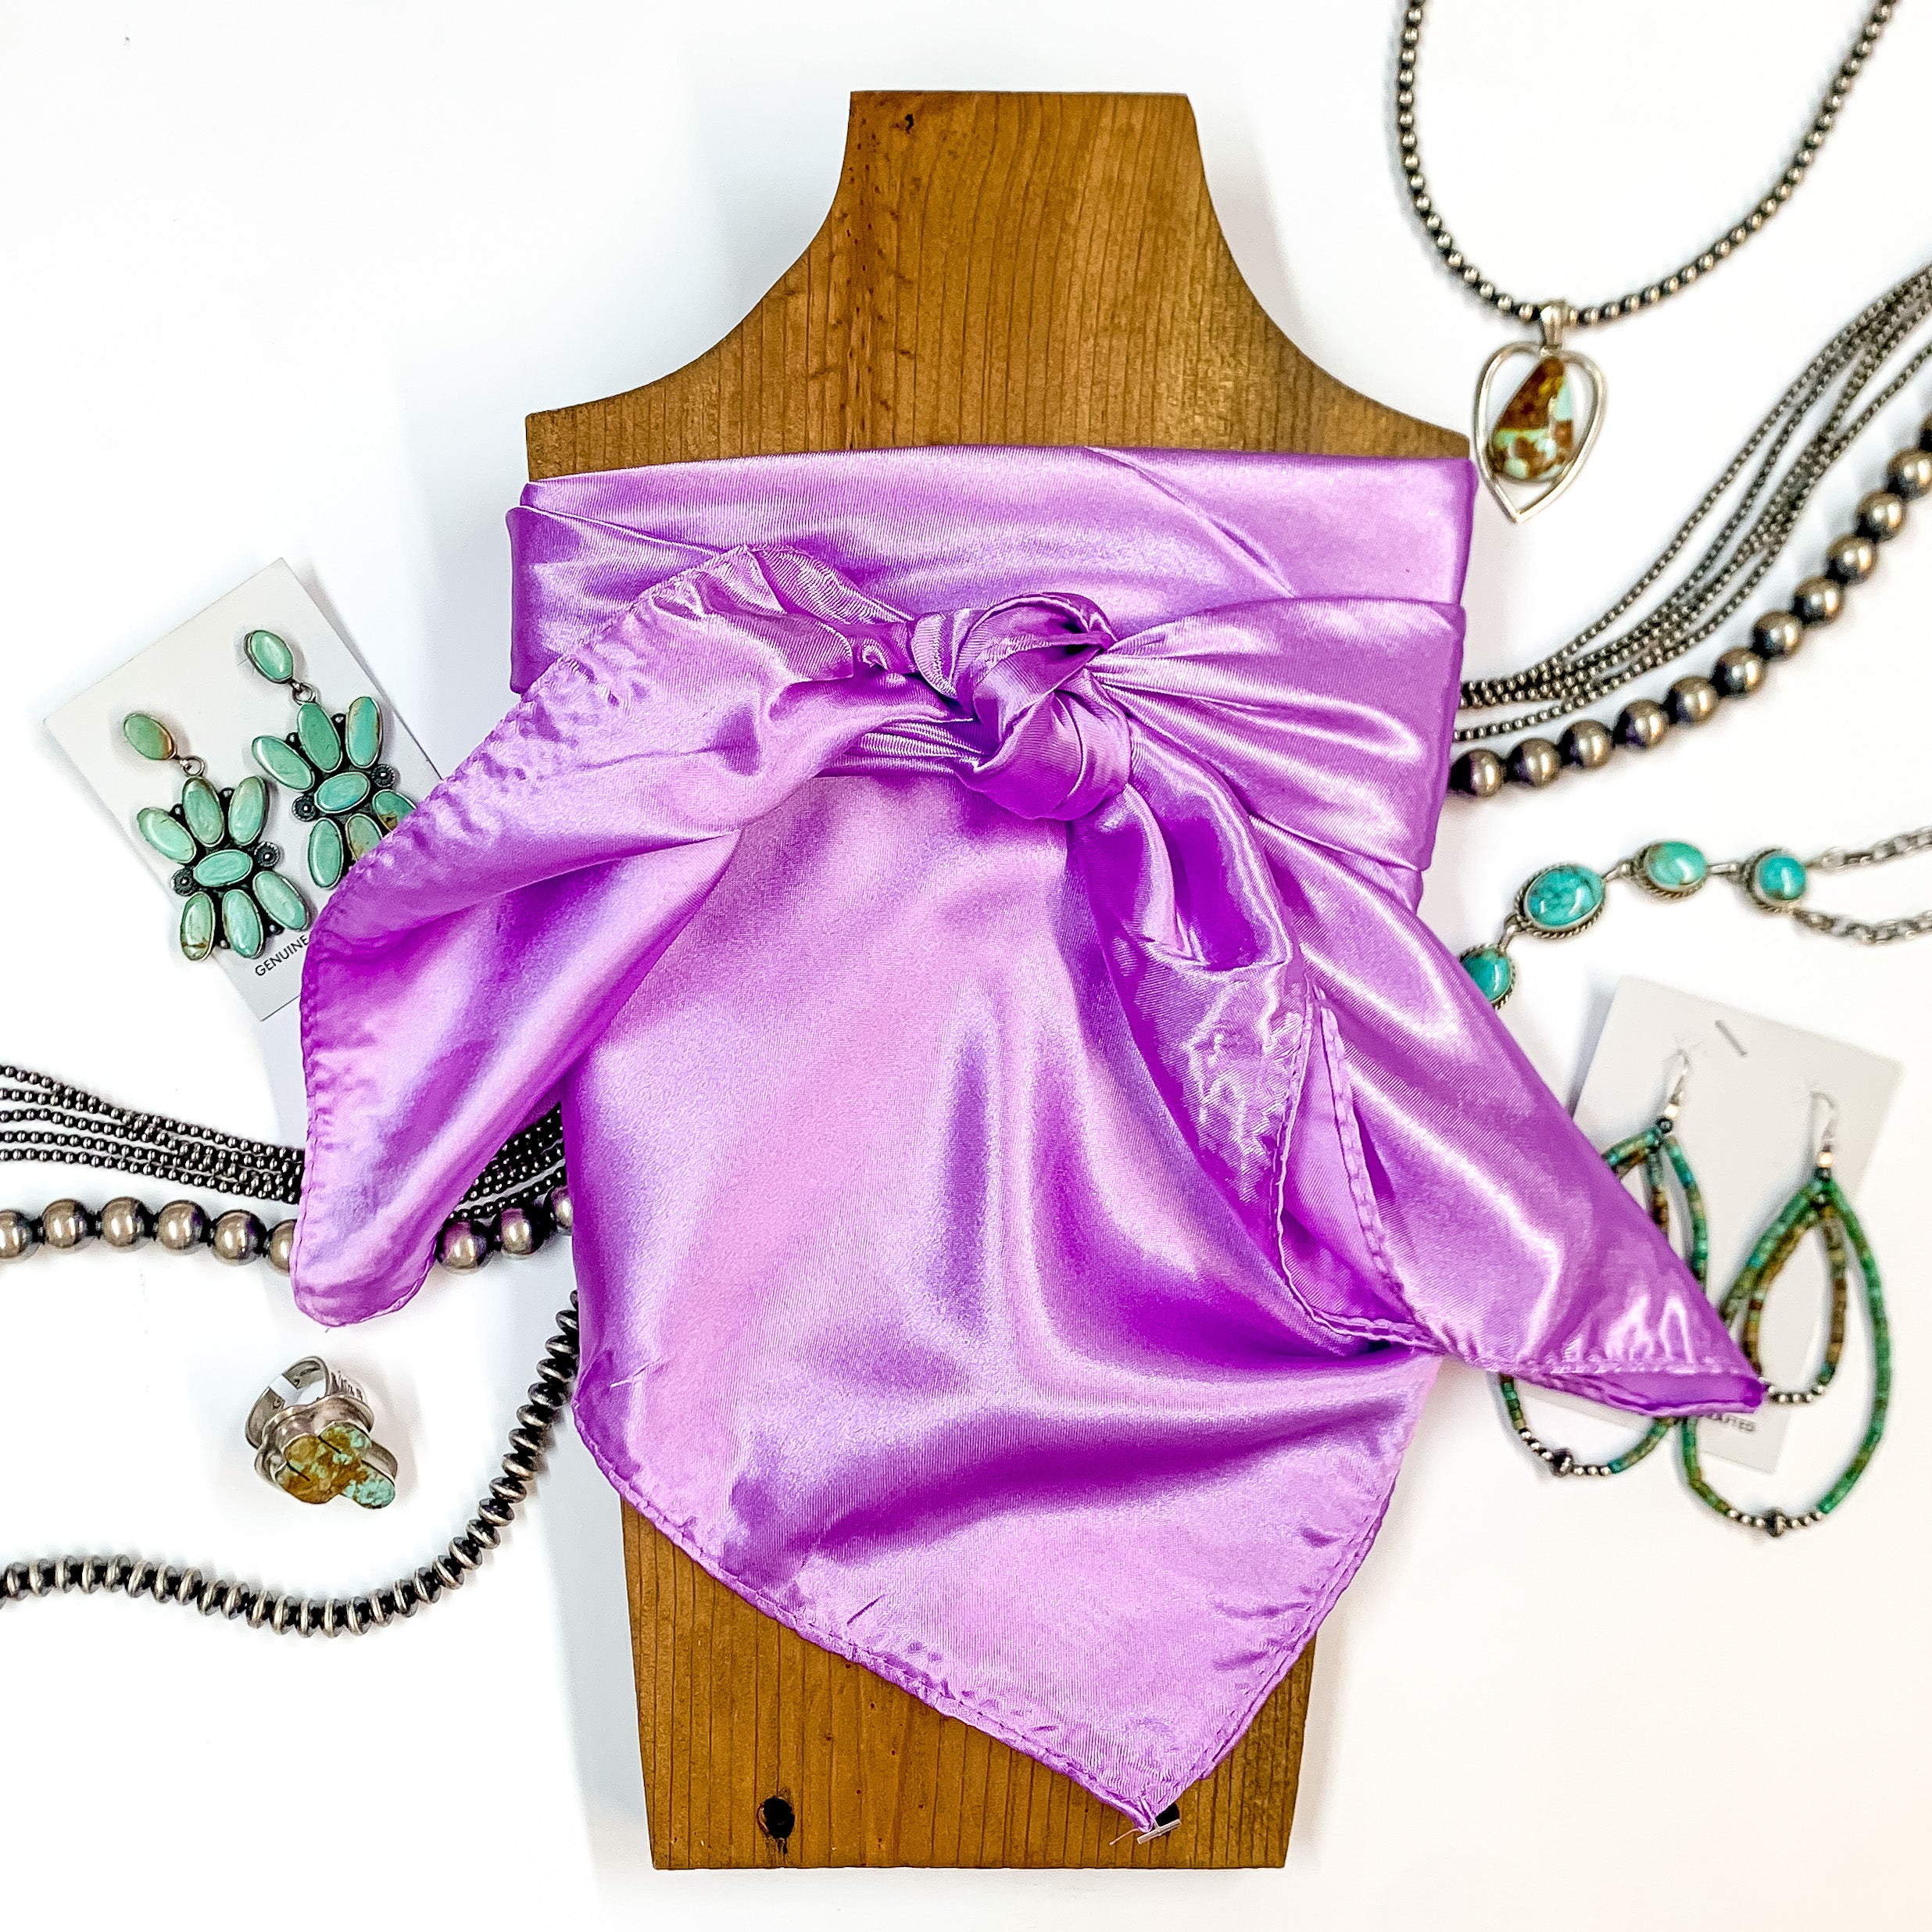 Solid colored scarf in Pastel Purple. Scarf is tied around a wooden piece. The scarf and piece of wood is pictured on a white background with Navajo jewelry spread out around it.